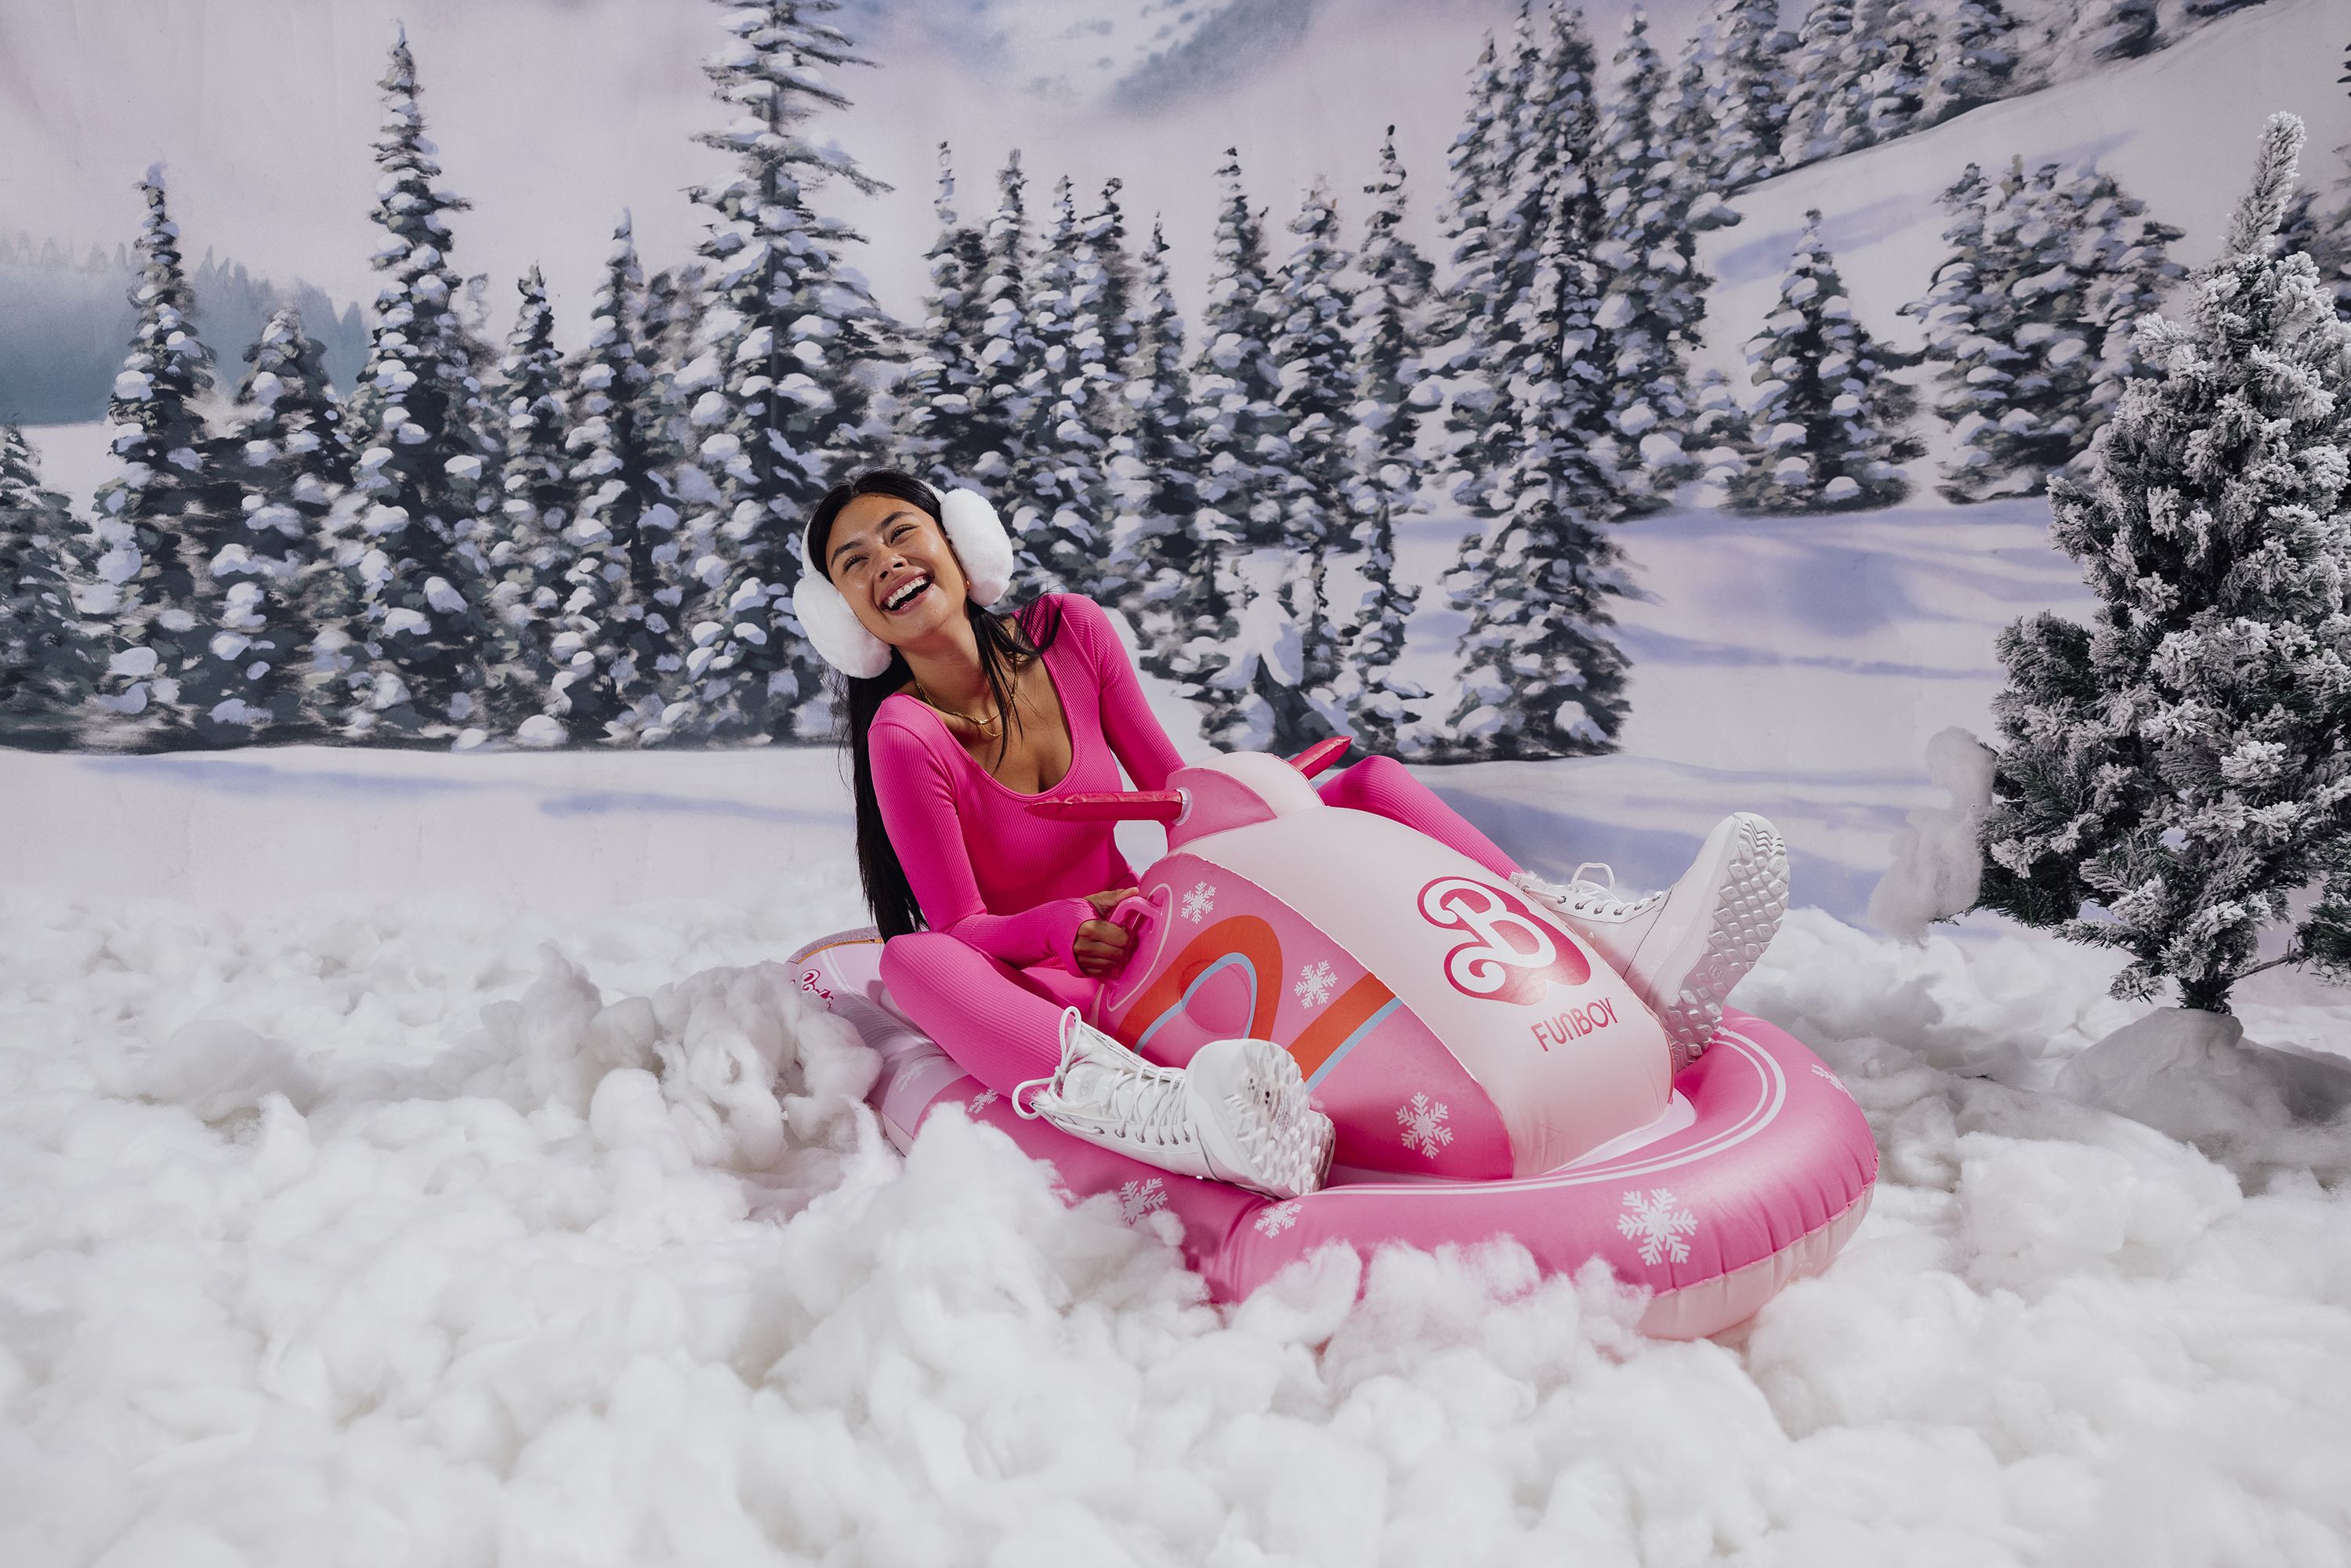 What To Wear For Snow Tubing This Winter - FUNBOY